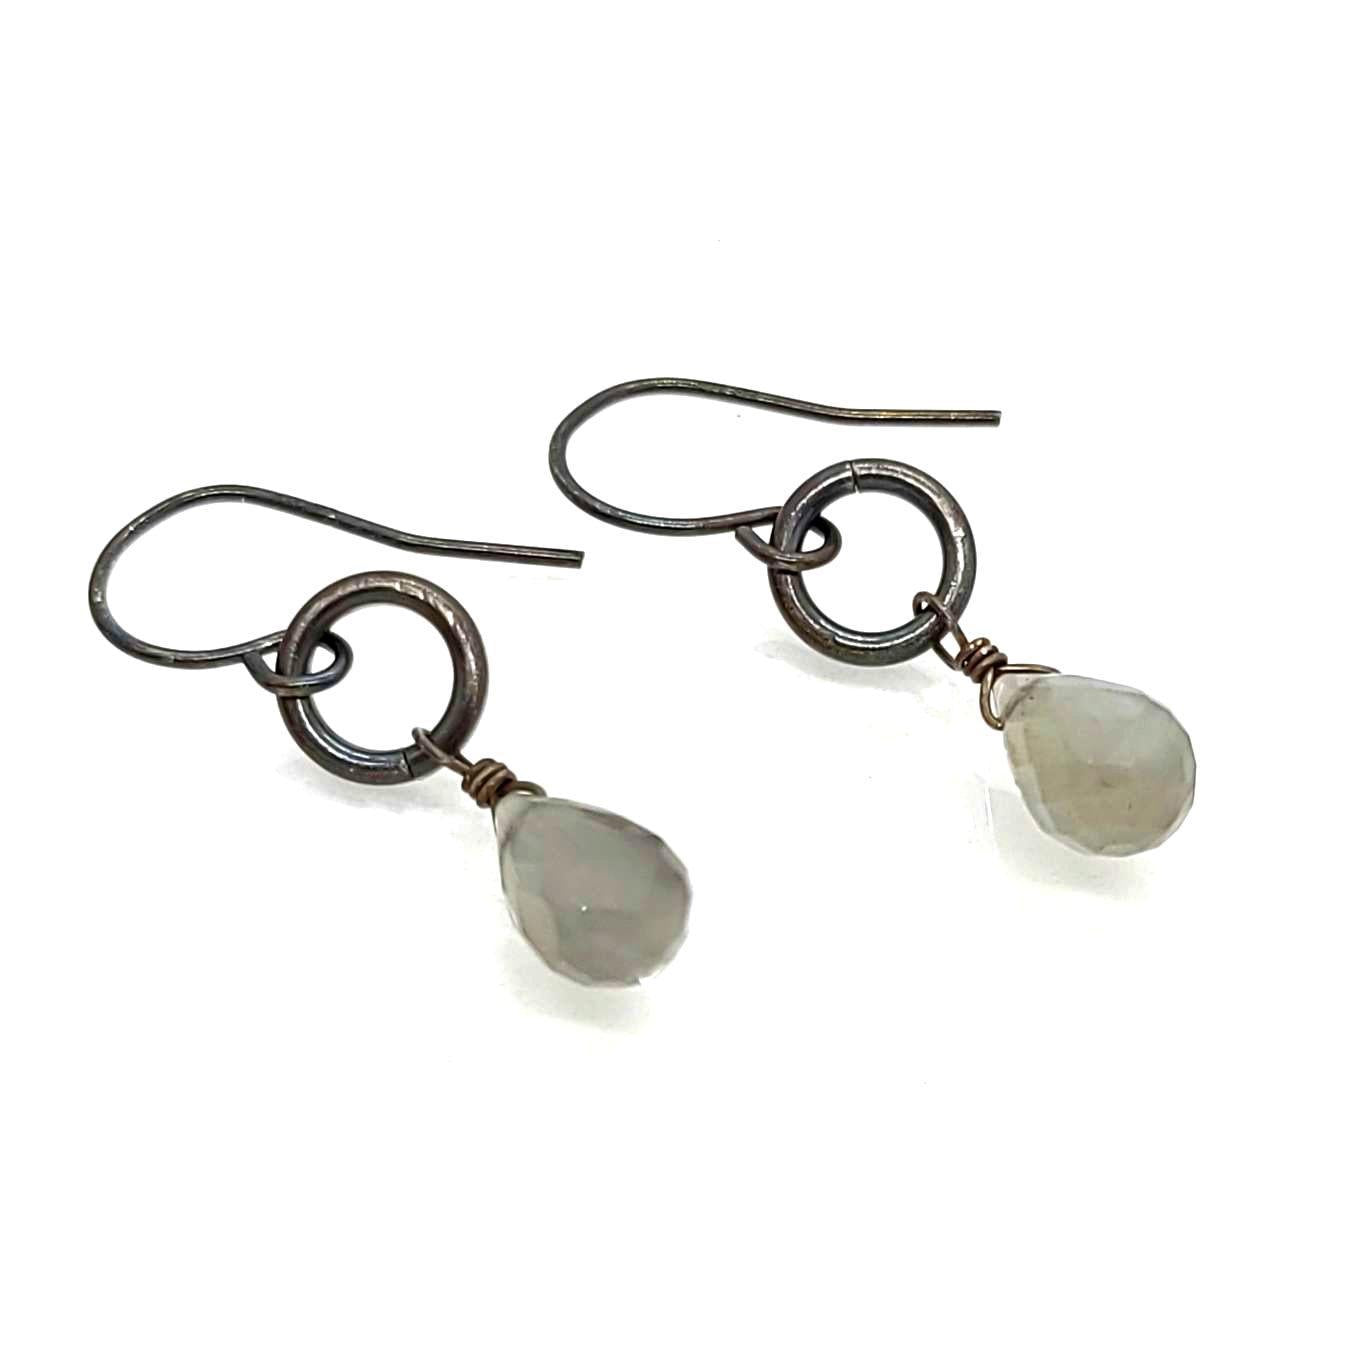 Earrings - Oxidized Silver Ring with Gray Moonstone Drops by Calliope Jewelry